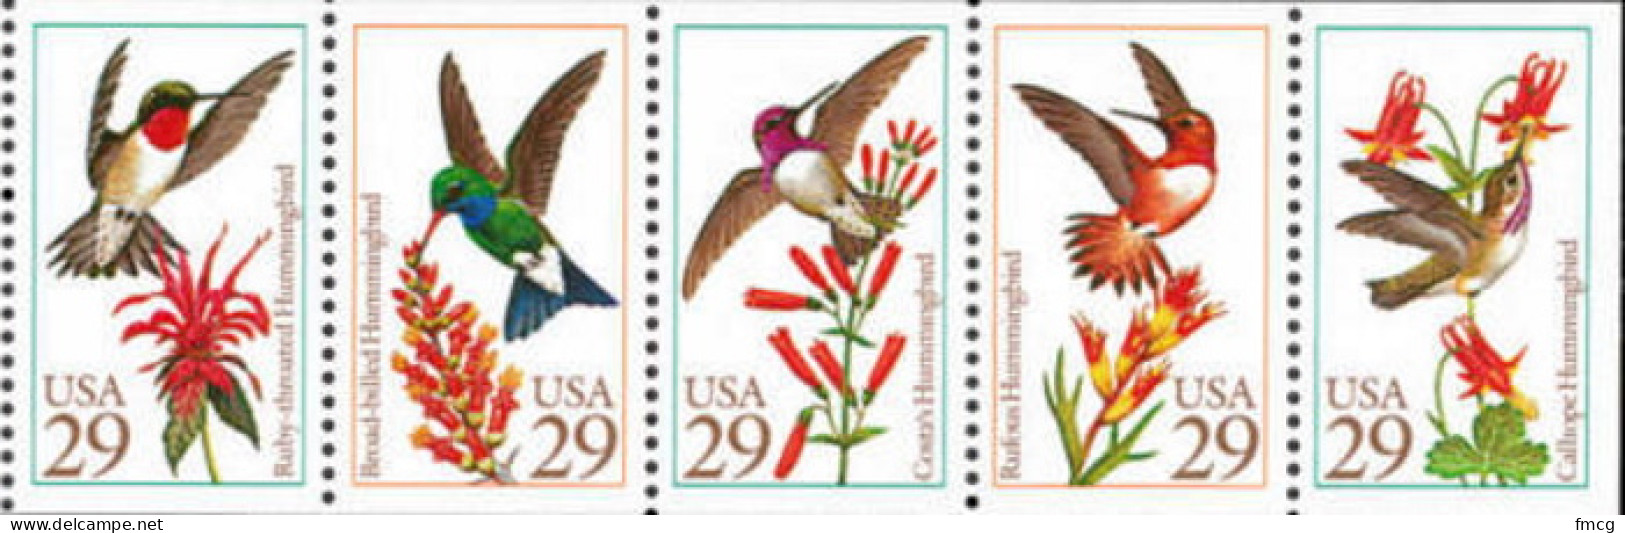 1992 29 Cents Hummingbirds, Booklet Pane Of 5, MNH - Unused Stamps